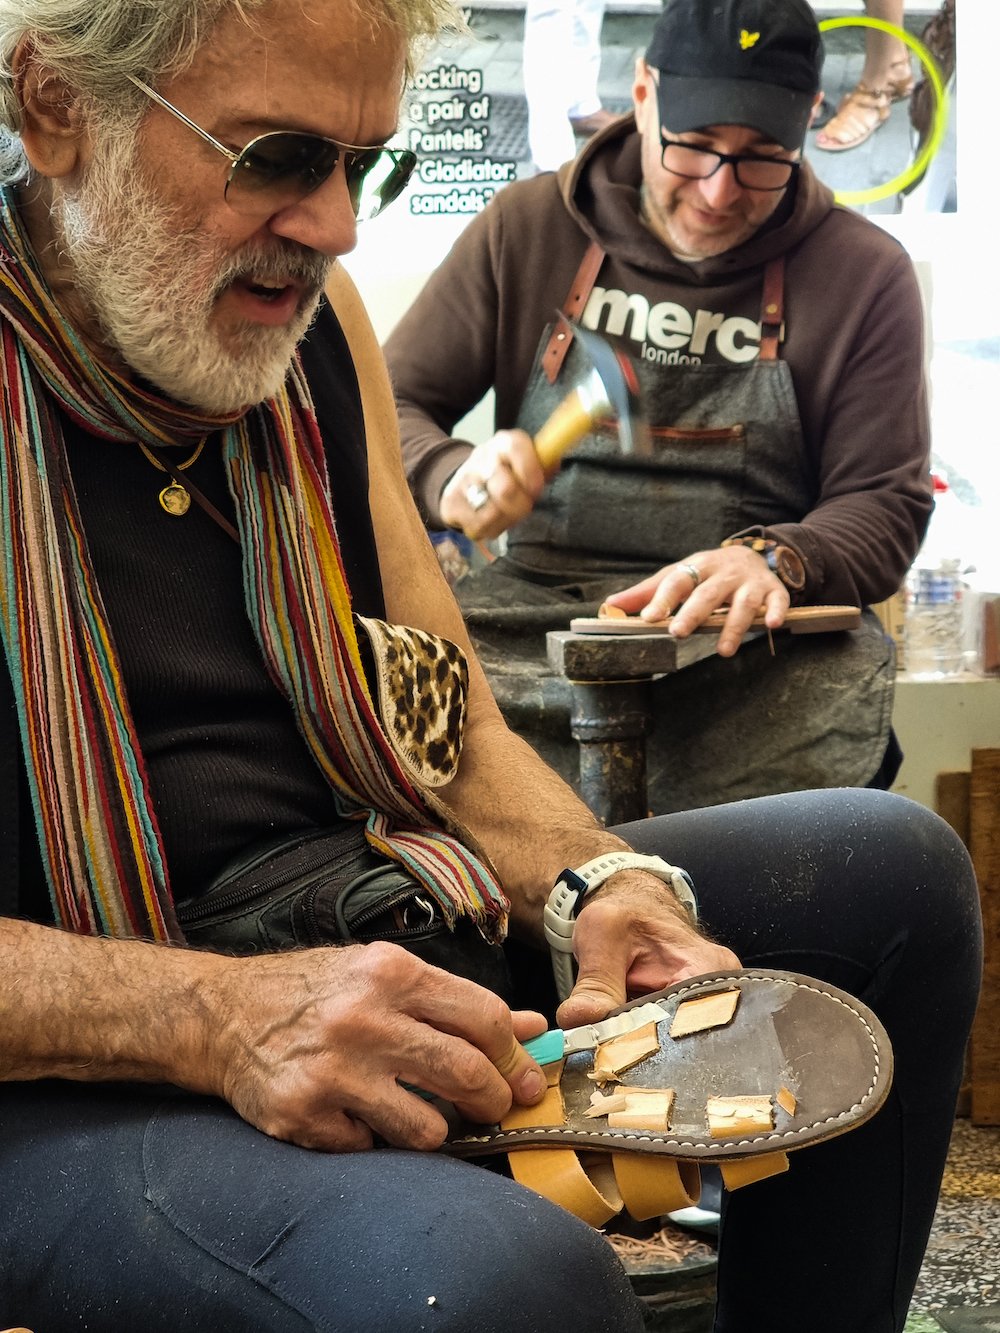 A man is working on a pair of Greek souvenir shoes, available to buy in Greece.